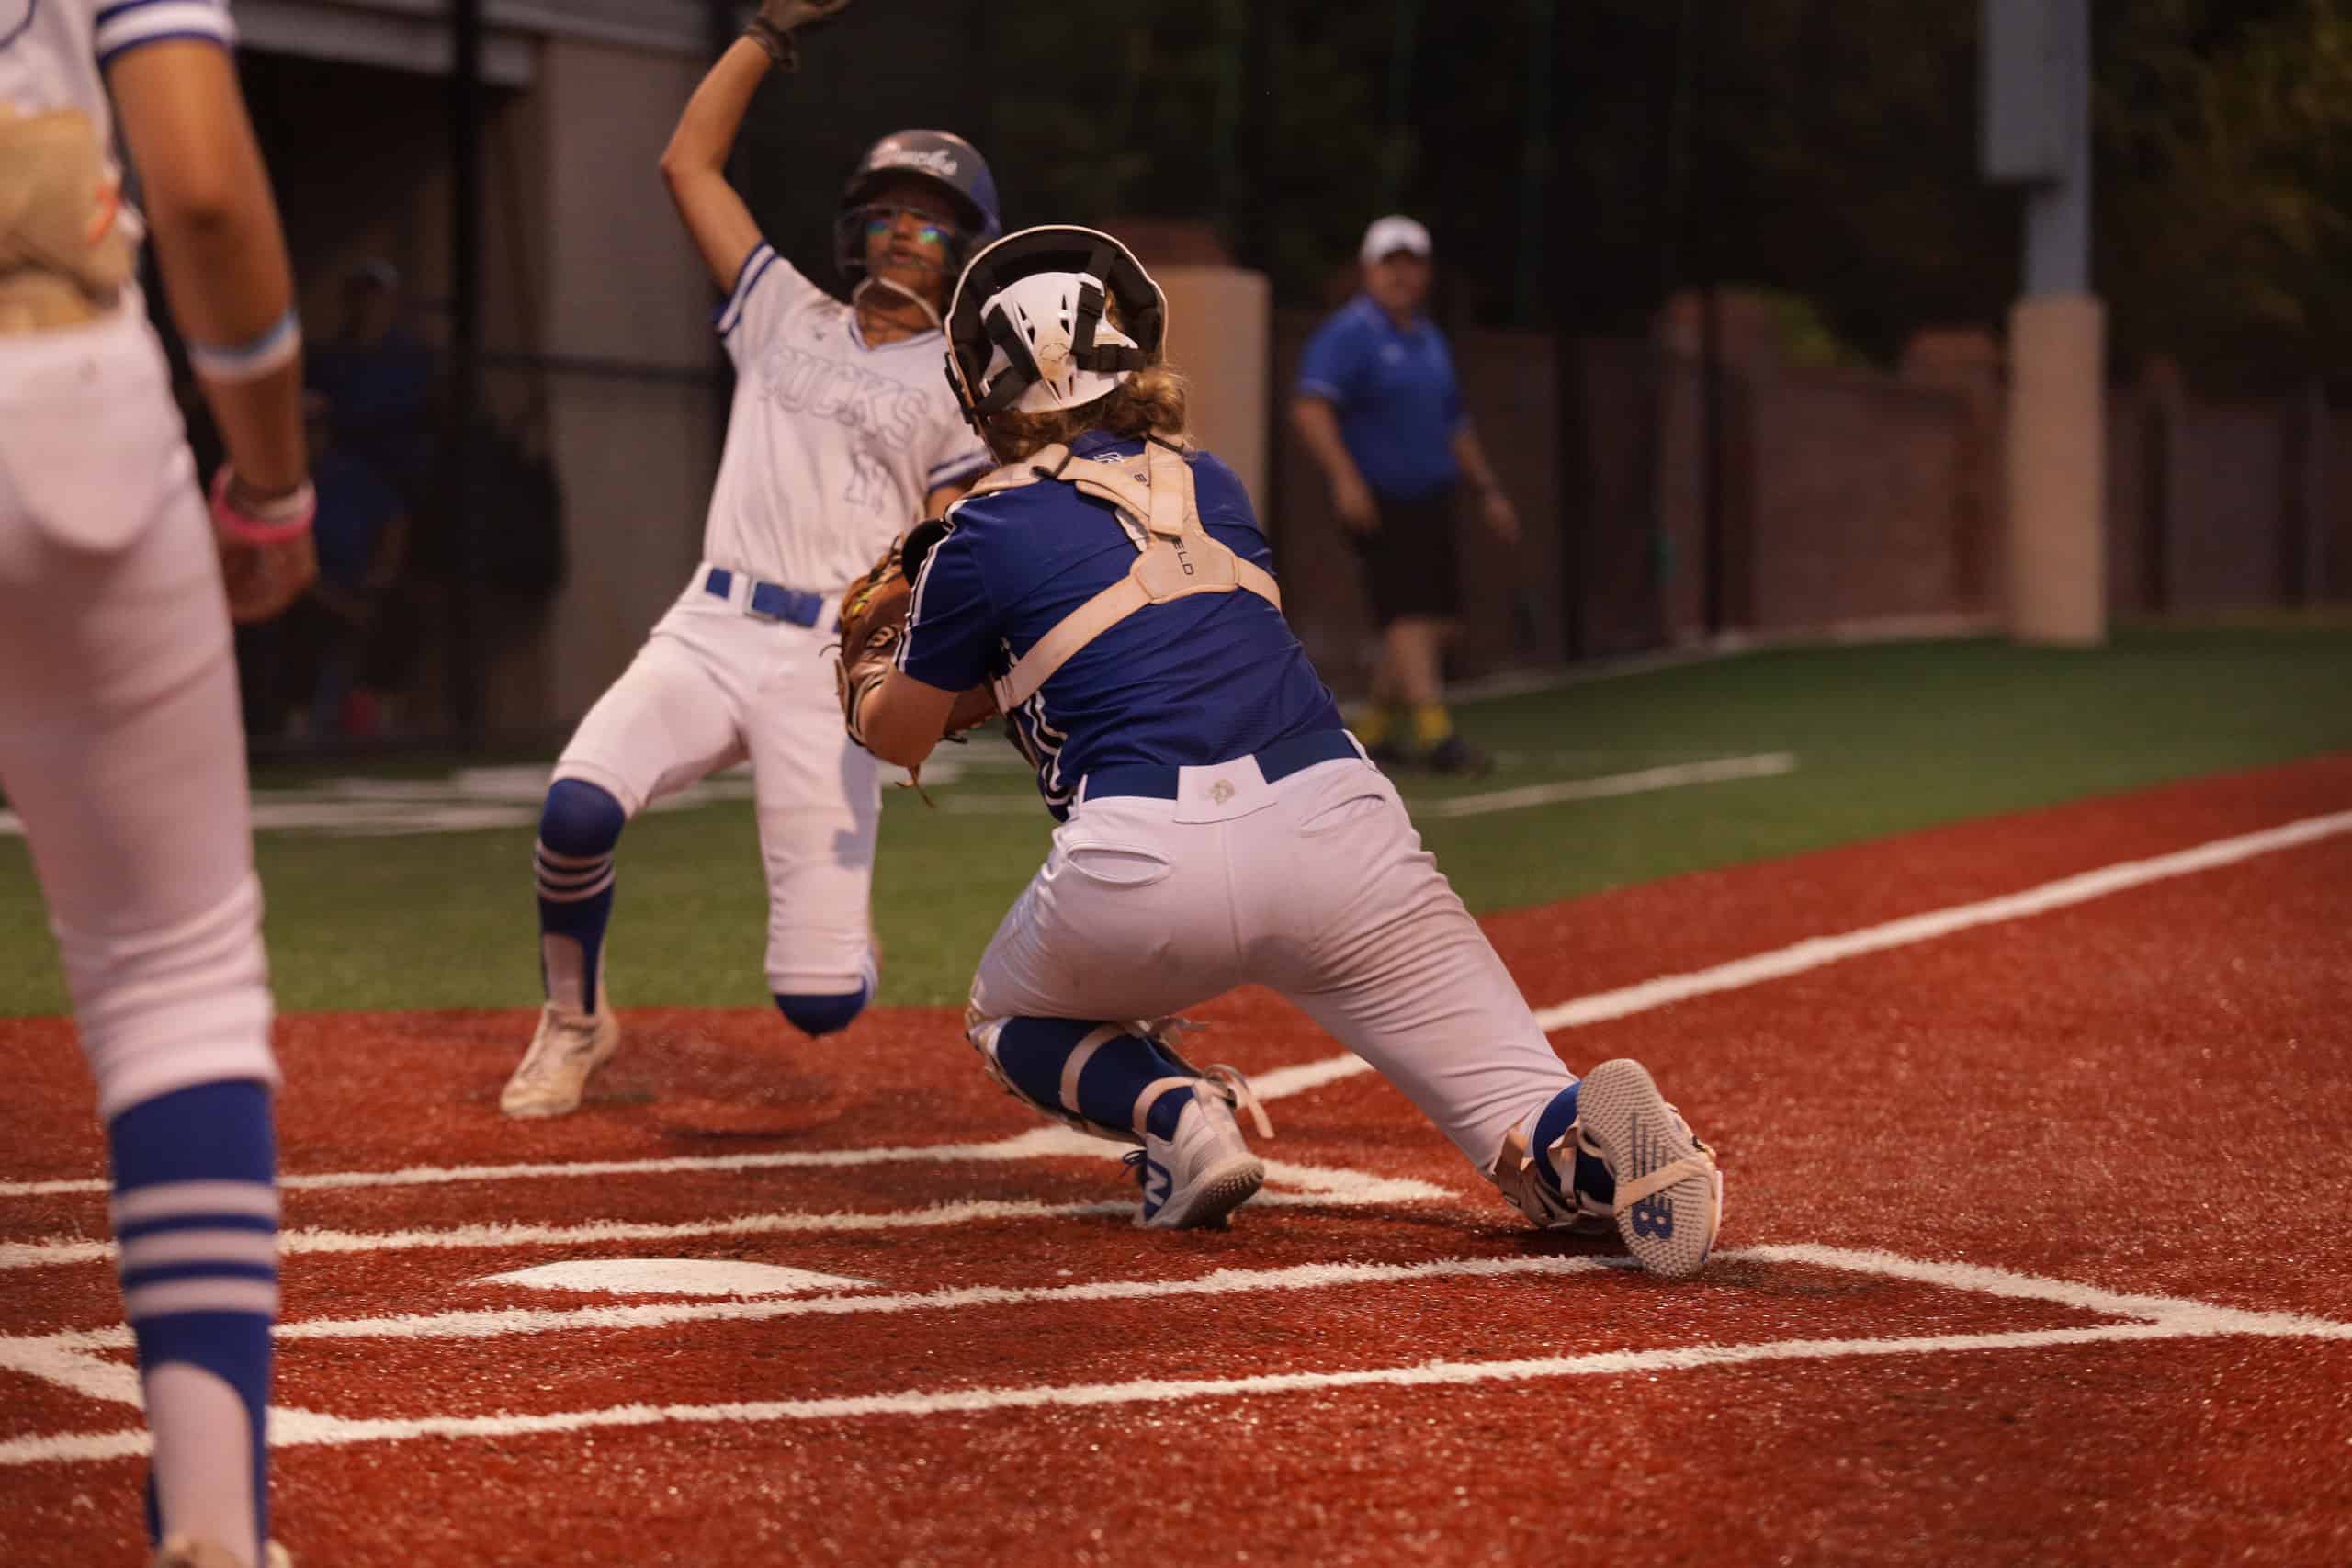 Lions Catcher Piper Gill making the tag at home in 3rd inning, saves a run. [Photo Provided by Sean Gill]